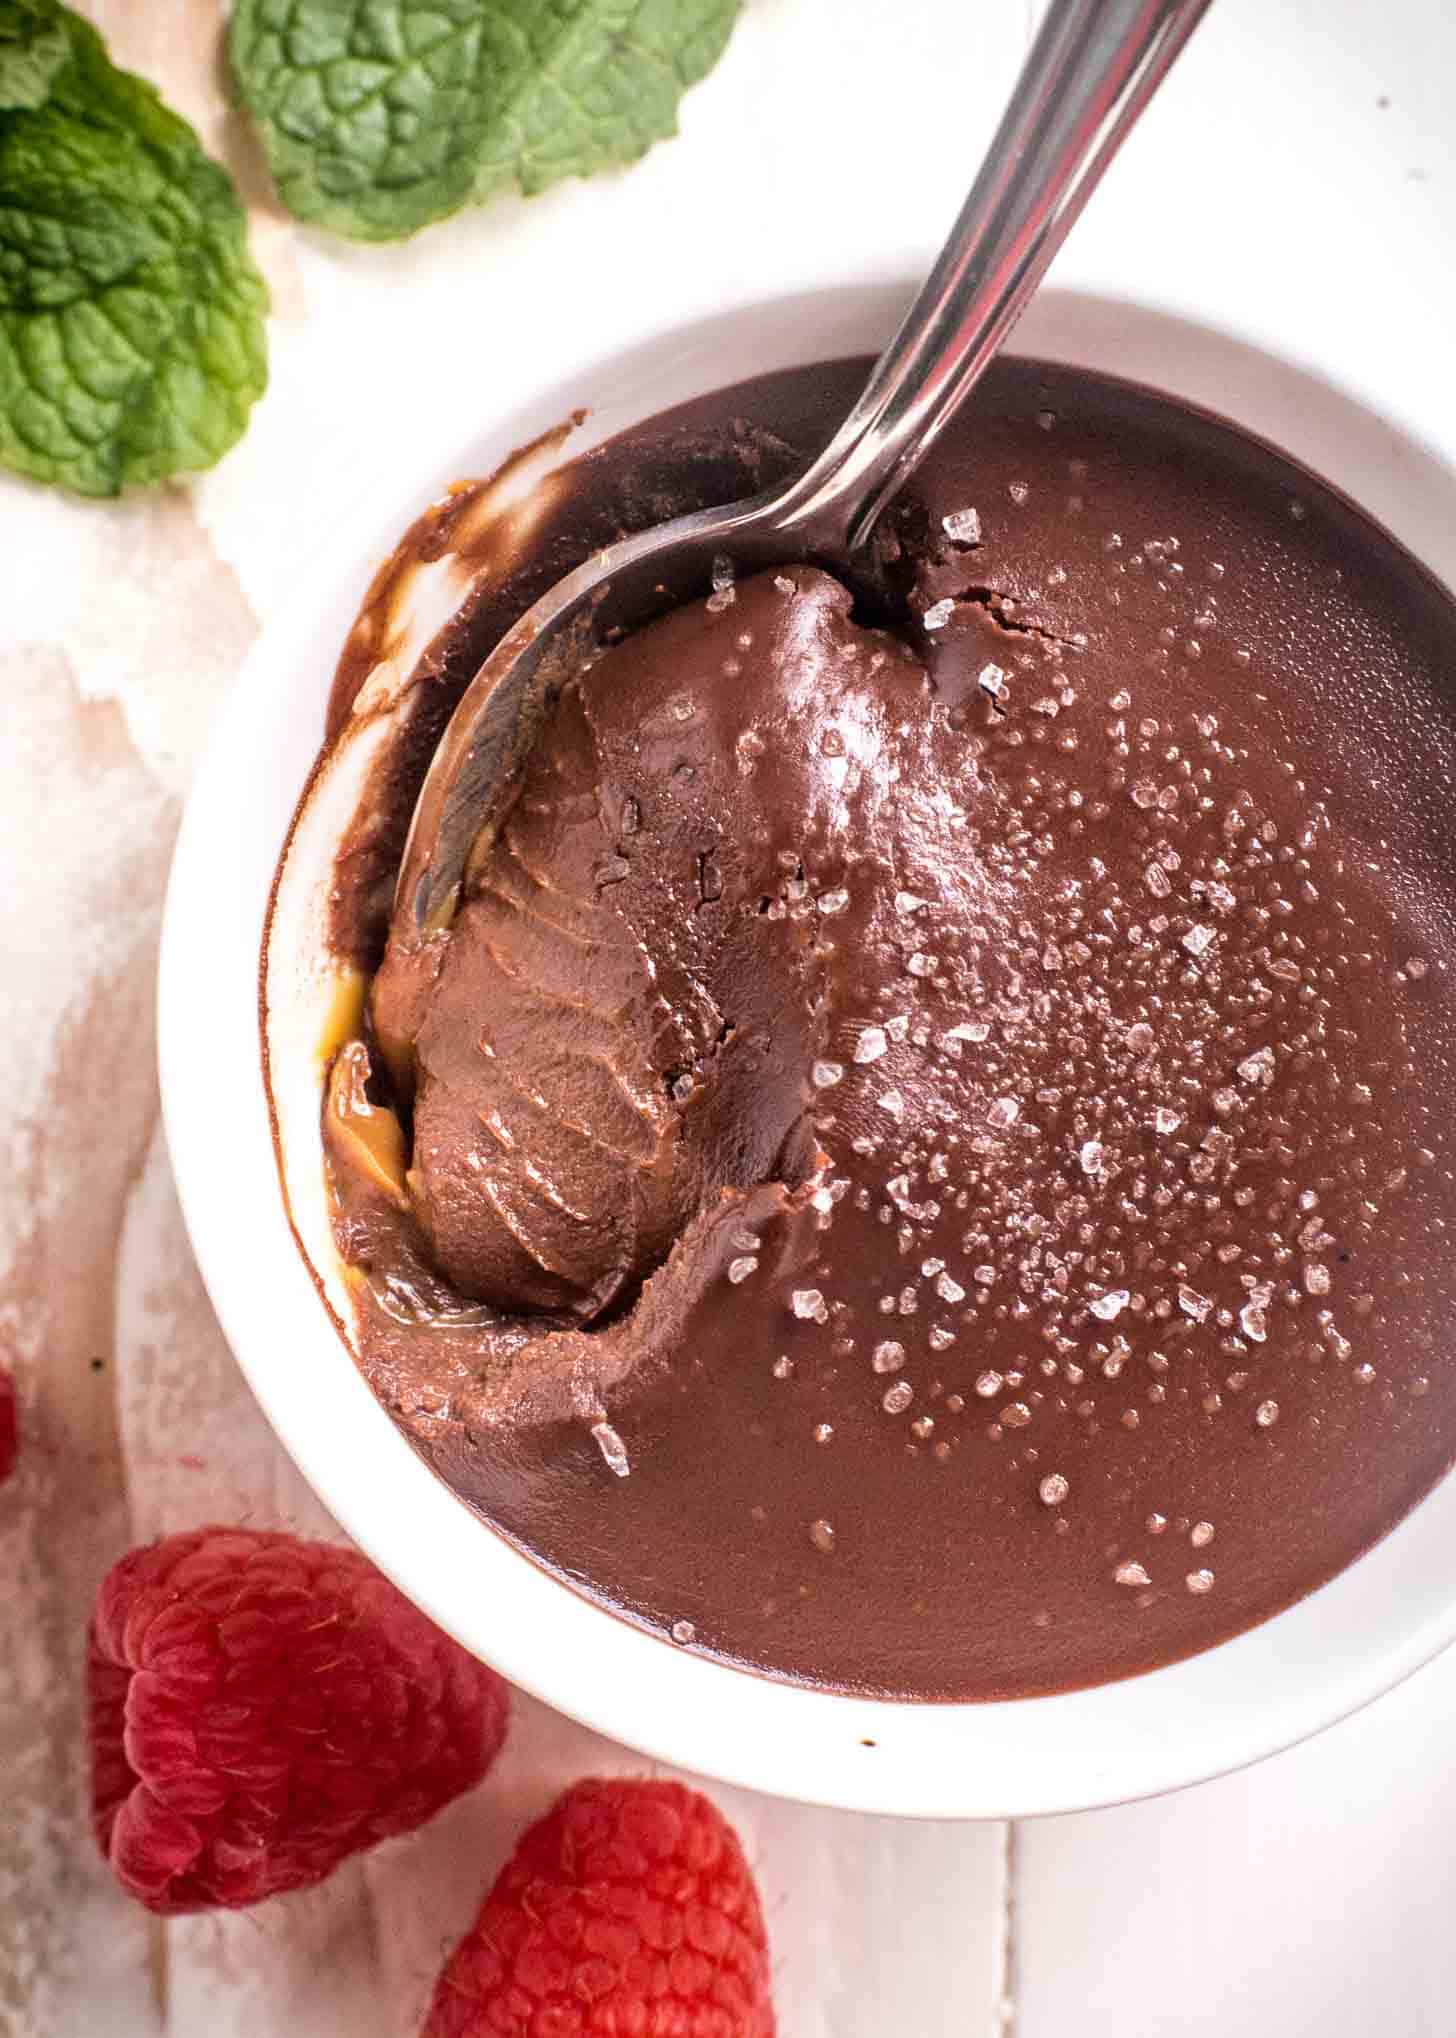 dipping a spoon into a chocolate cream bowl